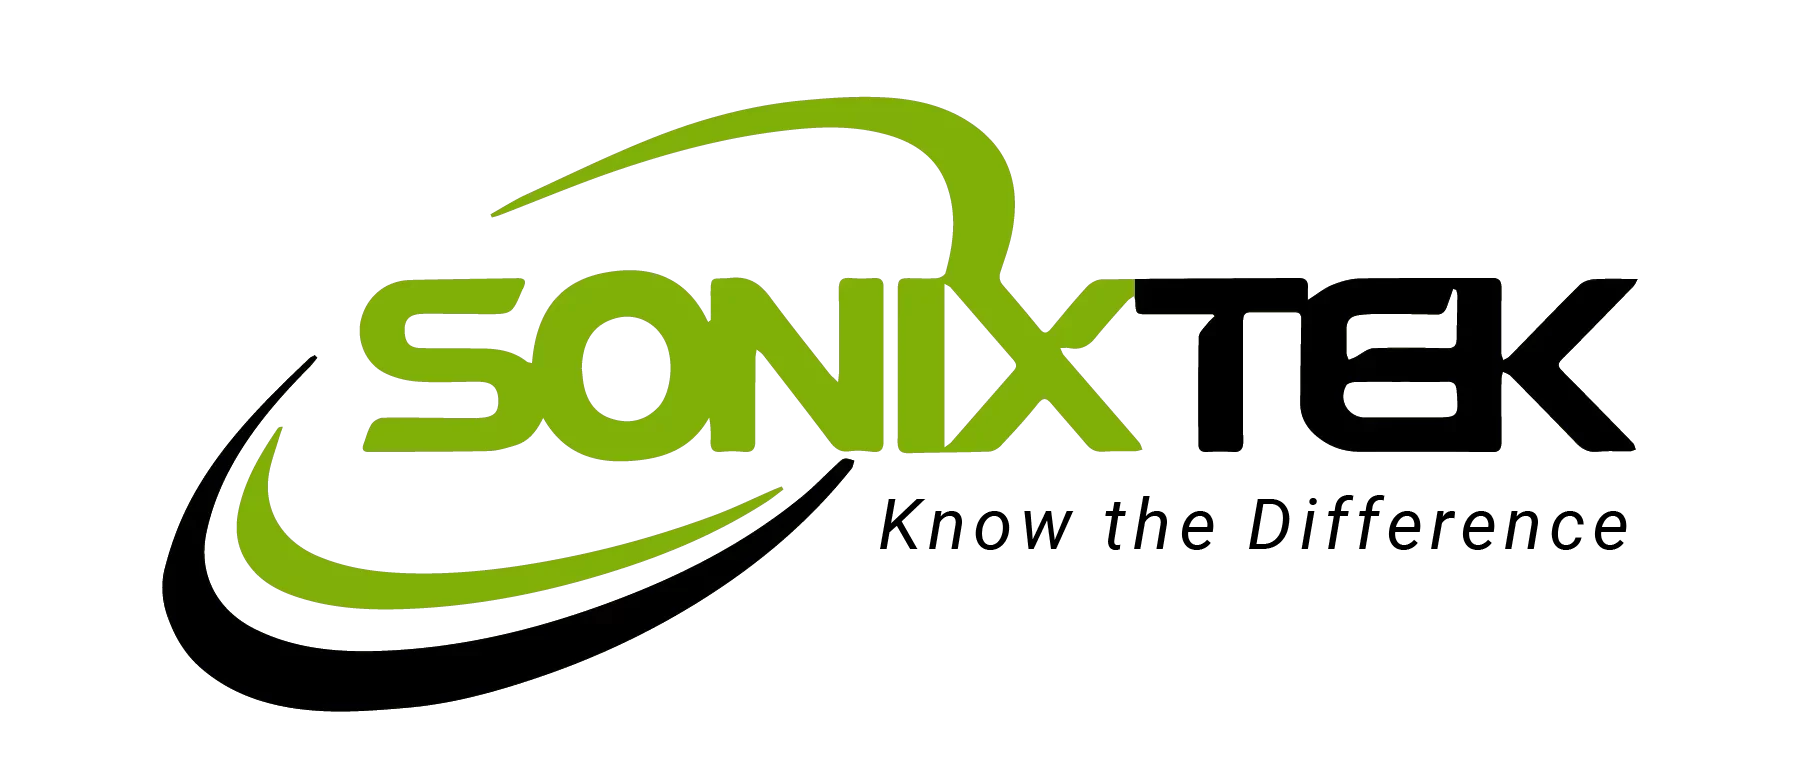 Sonixtek – Know the Difference